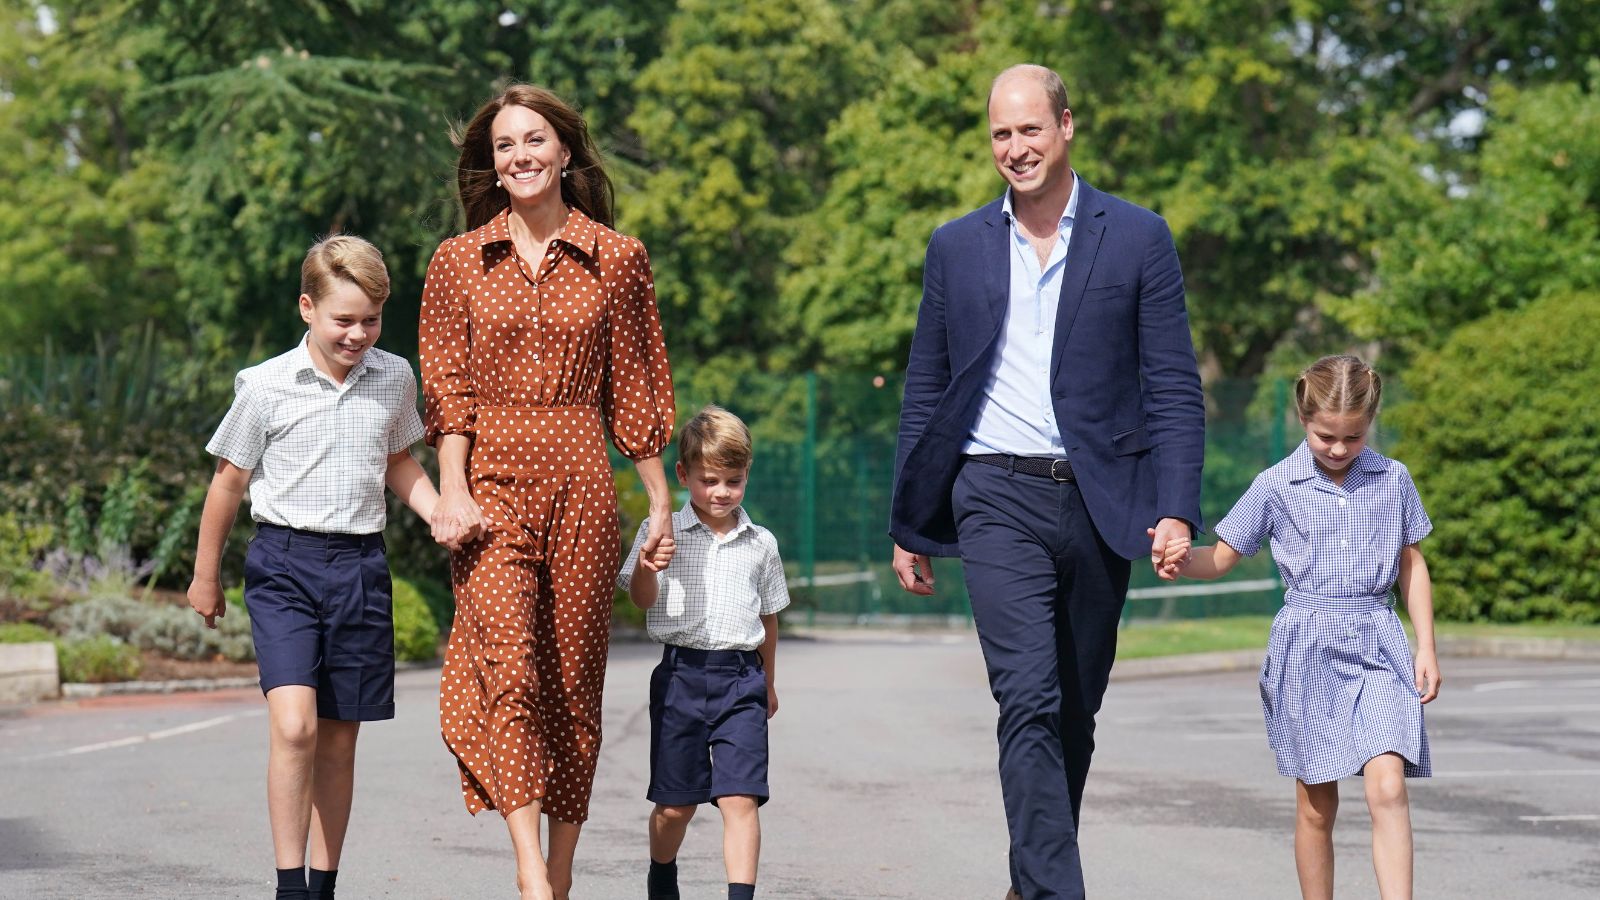 Kate Middleton and Prince William’s relationship in pictures first day at Lambrook